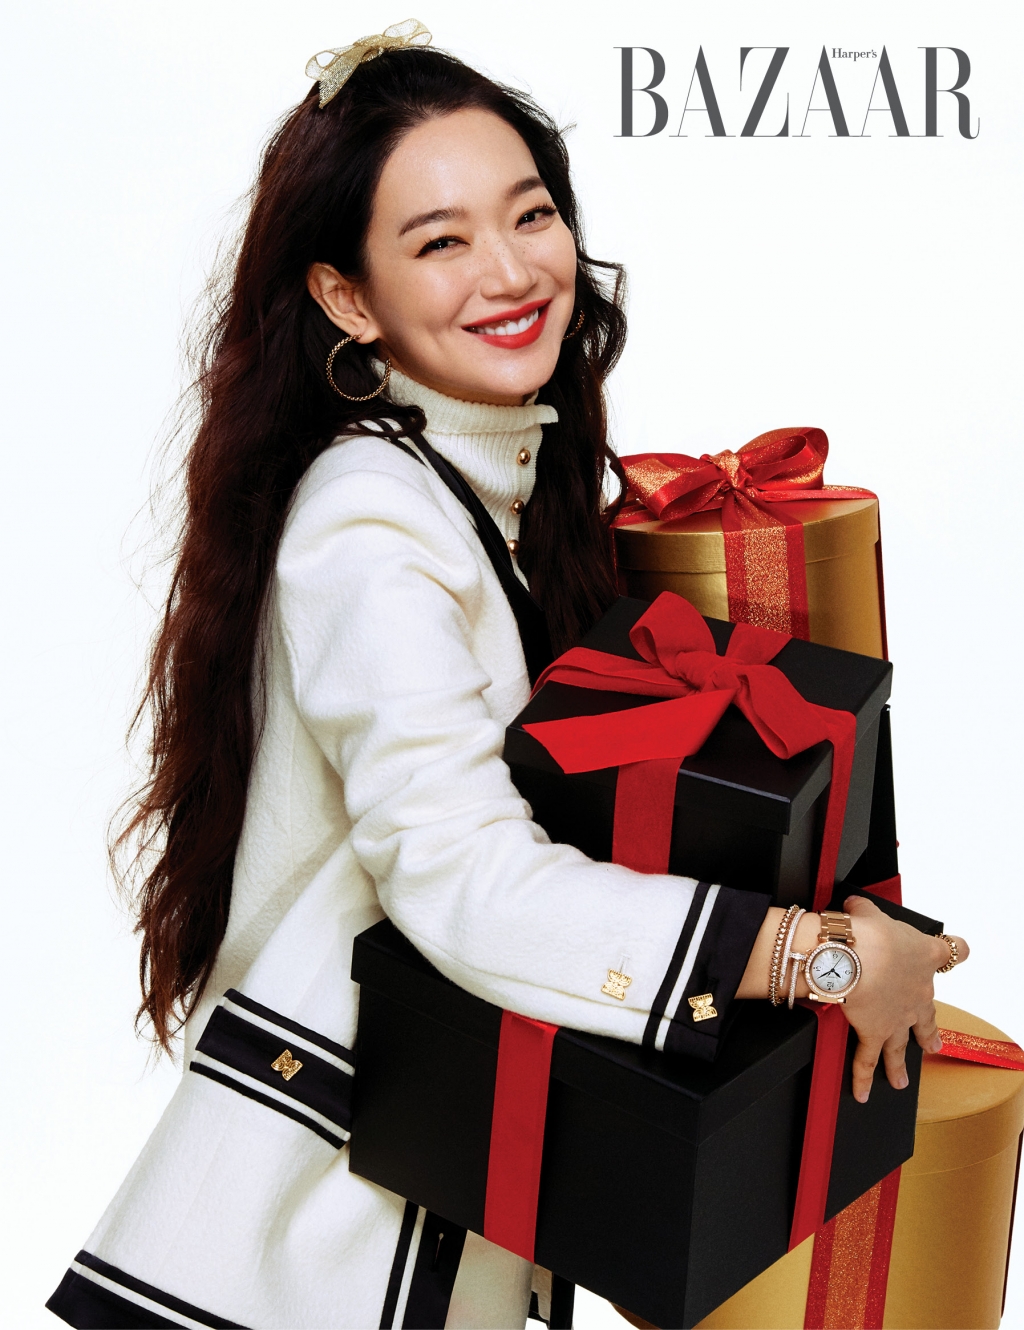 A further Holiday pictorial from Actor Shin Min-a has been released.Recently Shin Min-a showed a picture with Harpers Bazaar and Jewelry brand Cartier.Shin Min-a in the picture is a mini dress with a sense of volume and a black tights and a transform into Santa.Shin Min-a added the glamour with a gold, diamond jewelery from Cartier.In another cut, Shin Min-a is dressed in black and white costumes and holds a large gift basket: a glamorous Rose Watch and jewelery attract Sight.Meanwhile, Shin Min-a is in public with Actor Kim Woo-bin.Shin Min-a recently met with audiences with the movie Diva and is about to release a new movie Leave.